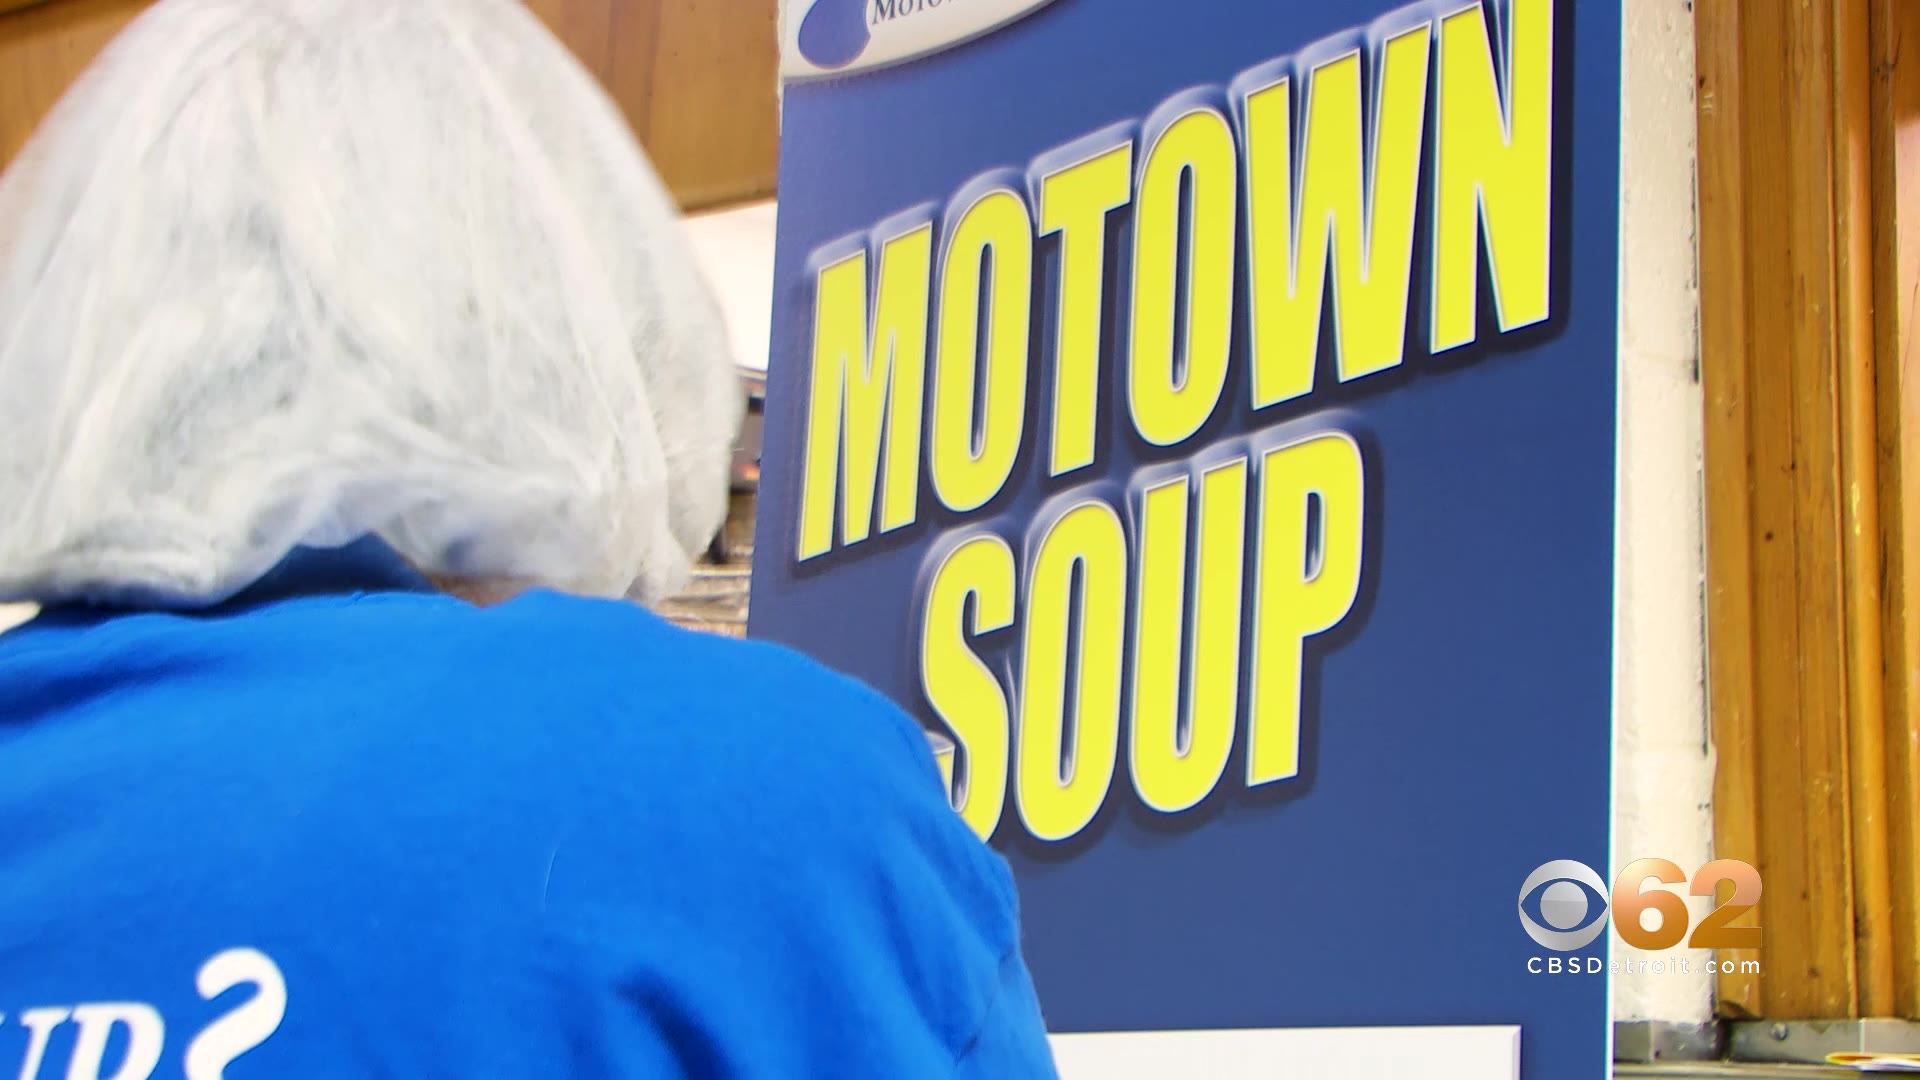 Motown Soup Is Good For You